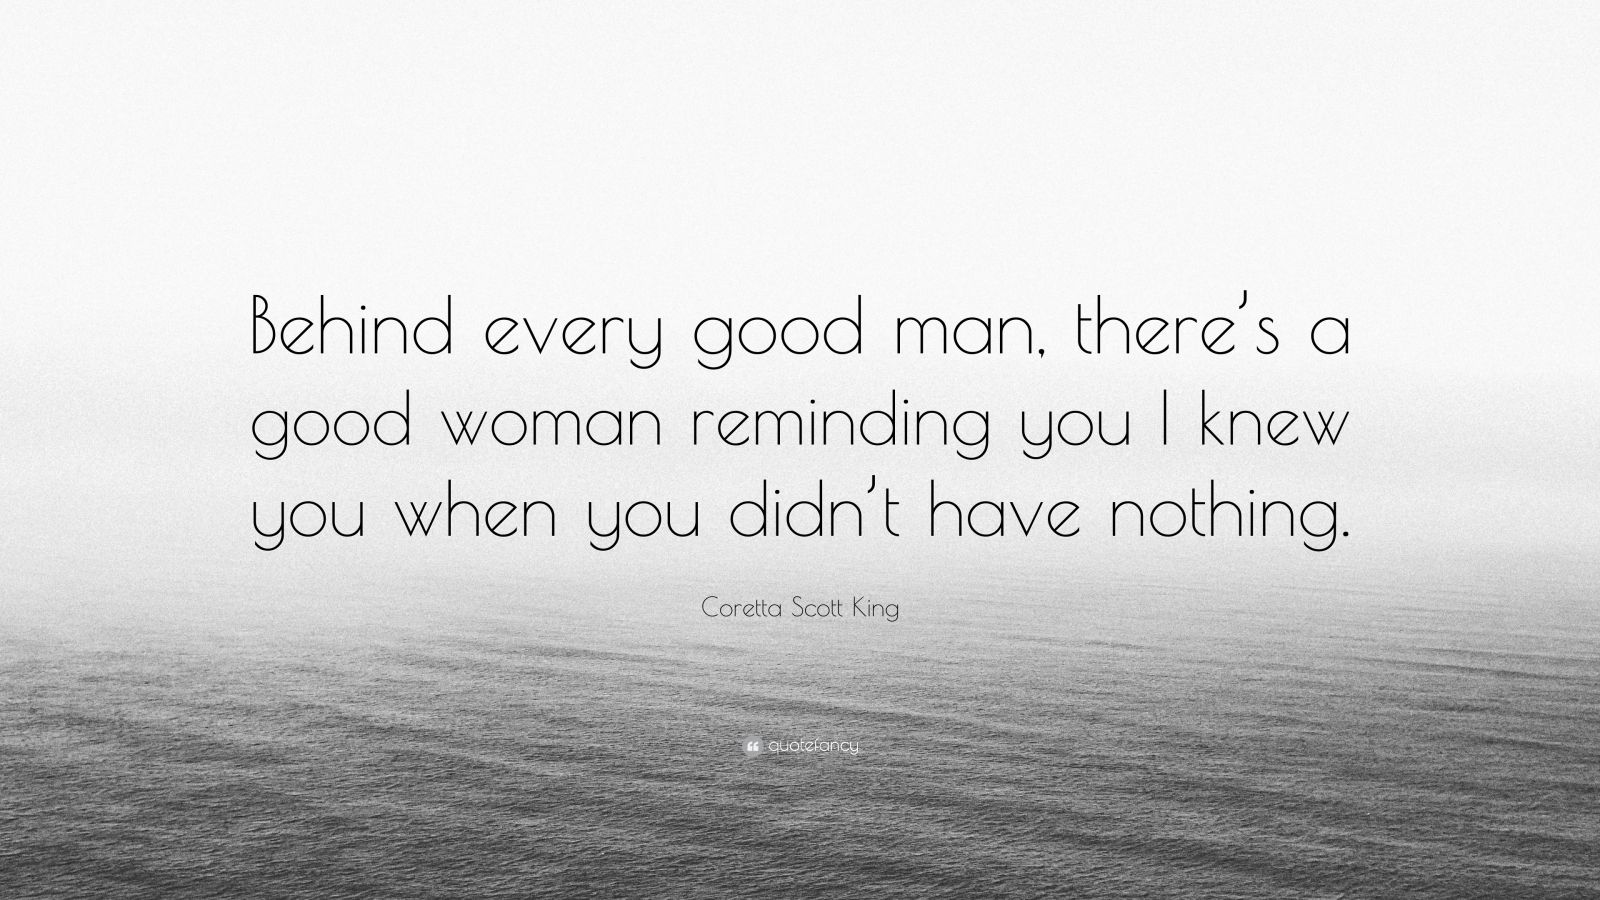 Coretta Scott King Quote: "Behind every good man, there's a good woman reminding you I knew you ...